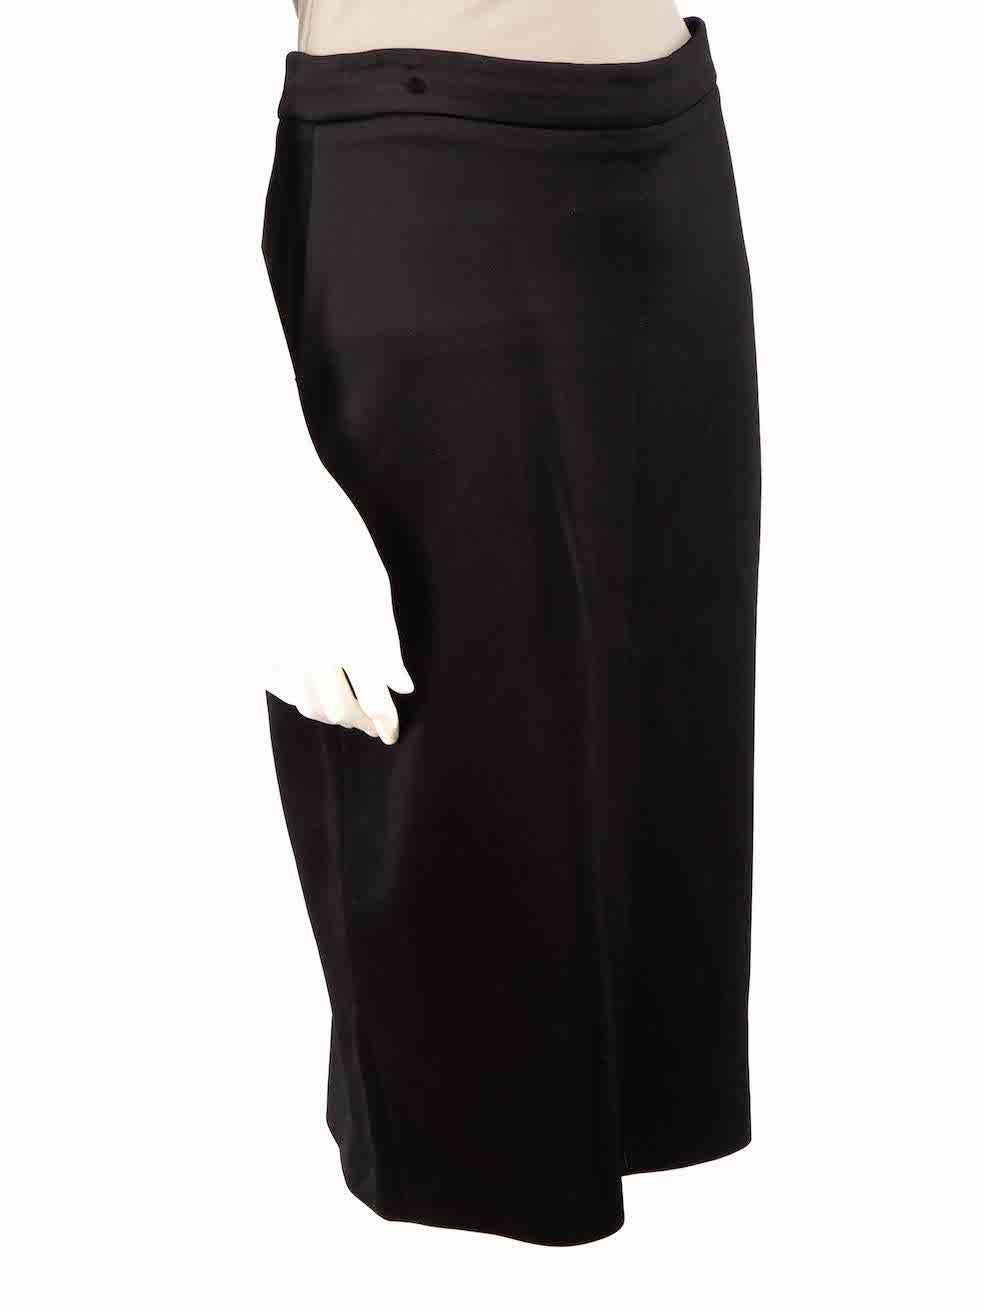 CONDITION is Good. Minor wear to skirt is evident. Light wear to the front and back with plucks to the weave on this used Givenchy designer resale item.
 
 
 
 Details
 
 
 Black
 
 Viscose
 
 Pencil skirt
 
 Knee length
 
 Back sip fastening
 
 
 
